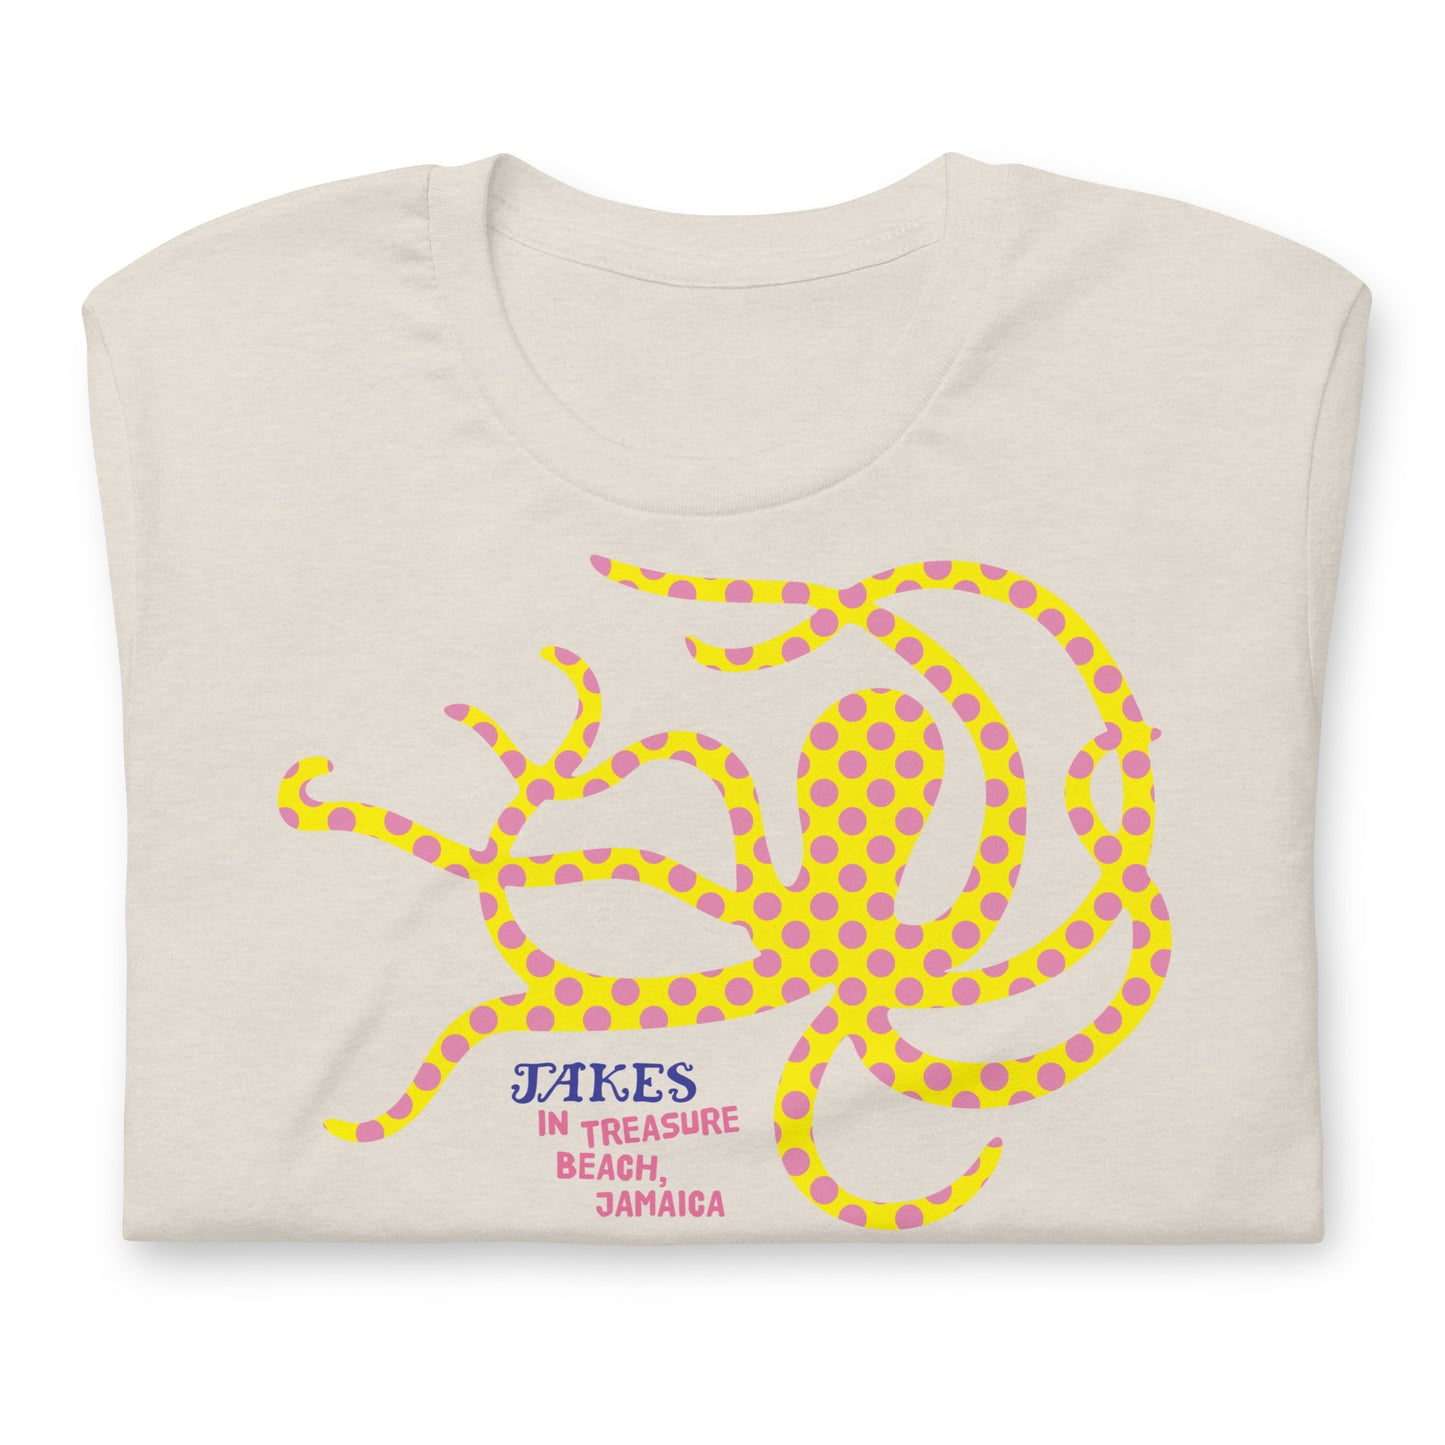 Jakes Yellow Octopus Unisex T-Shirt in Multiple Colors